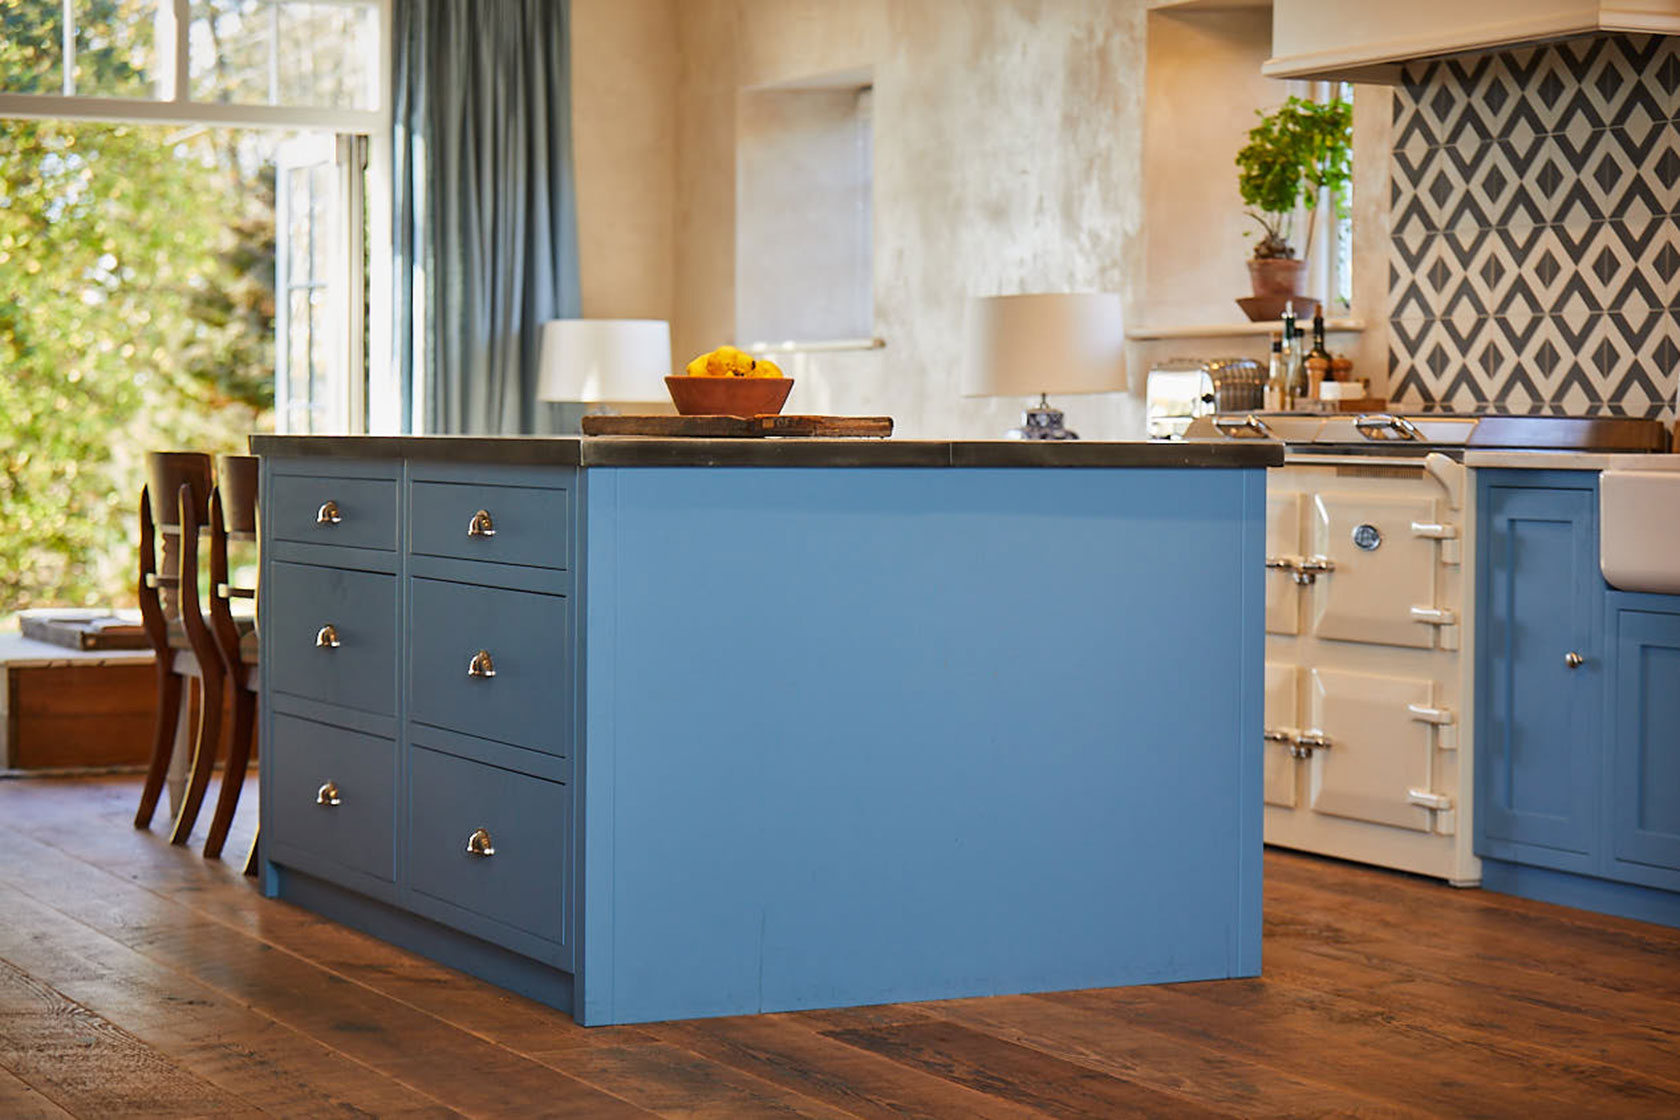 Two pan drawers in bespoke kitchen island with zinc worktop